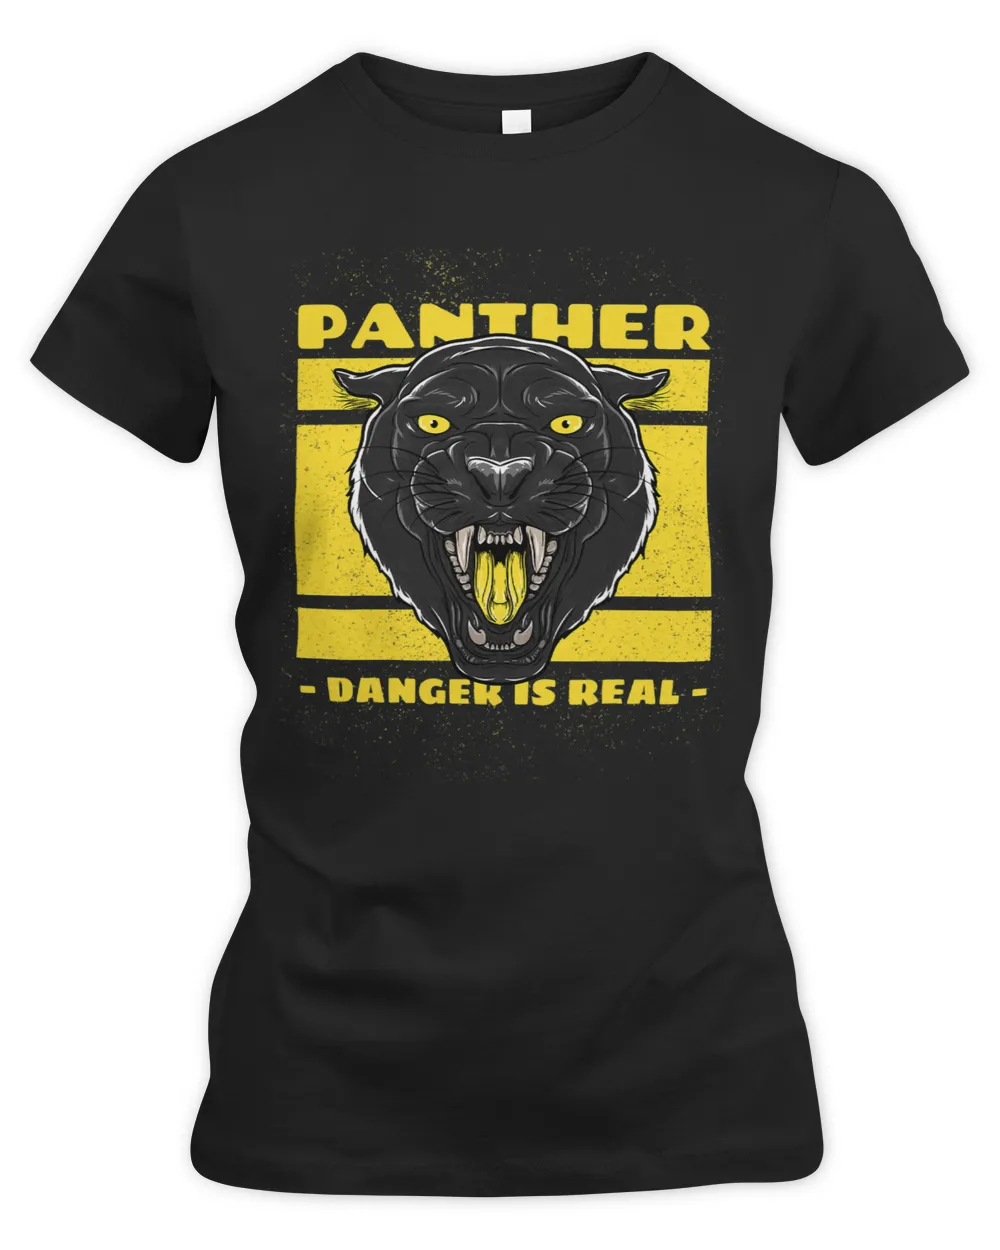 Panther danger is real black and yellow Retro style